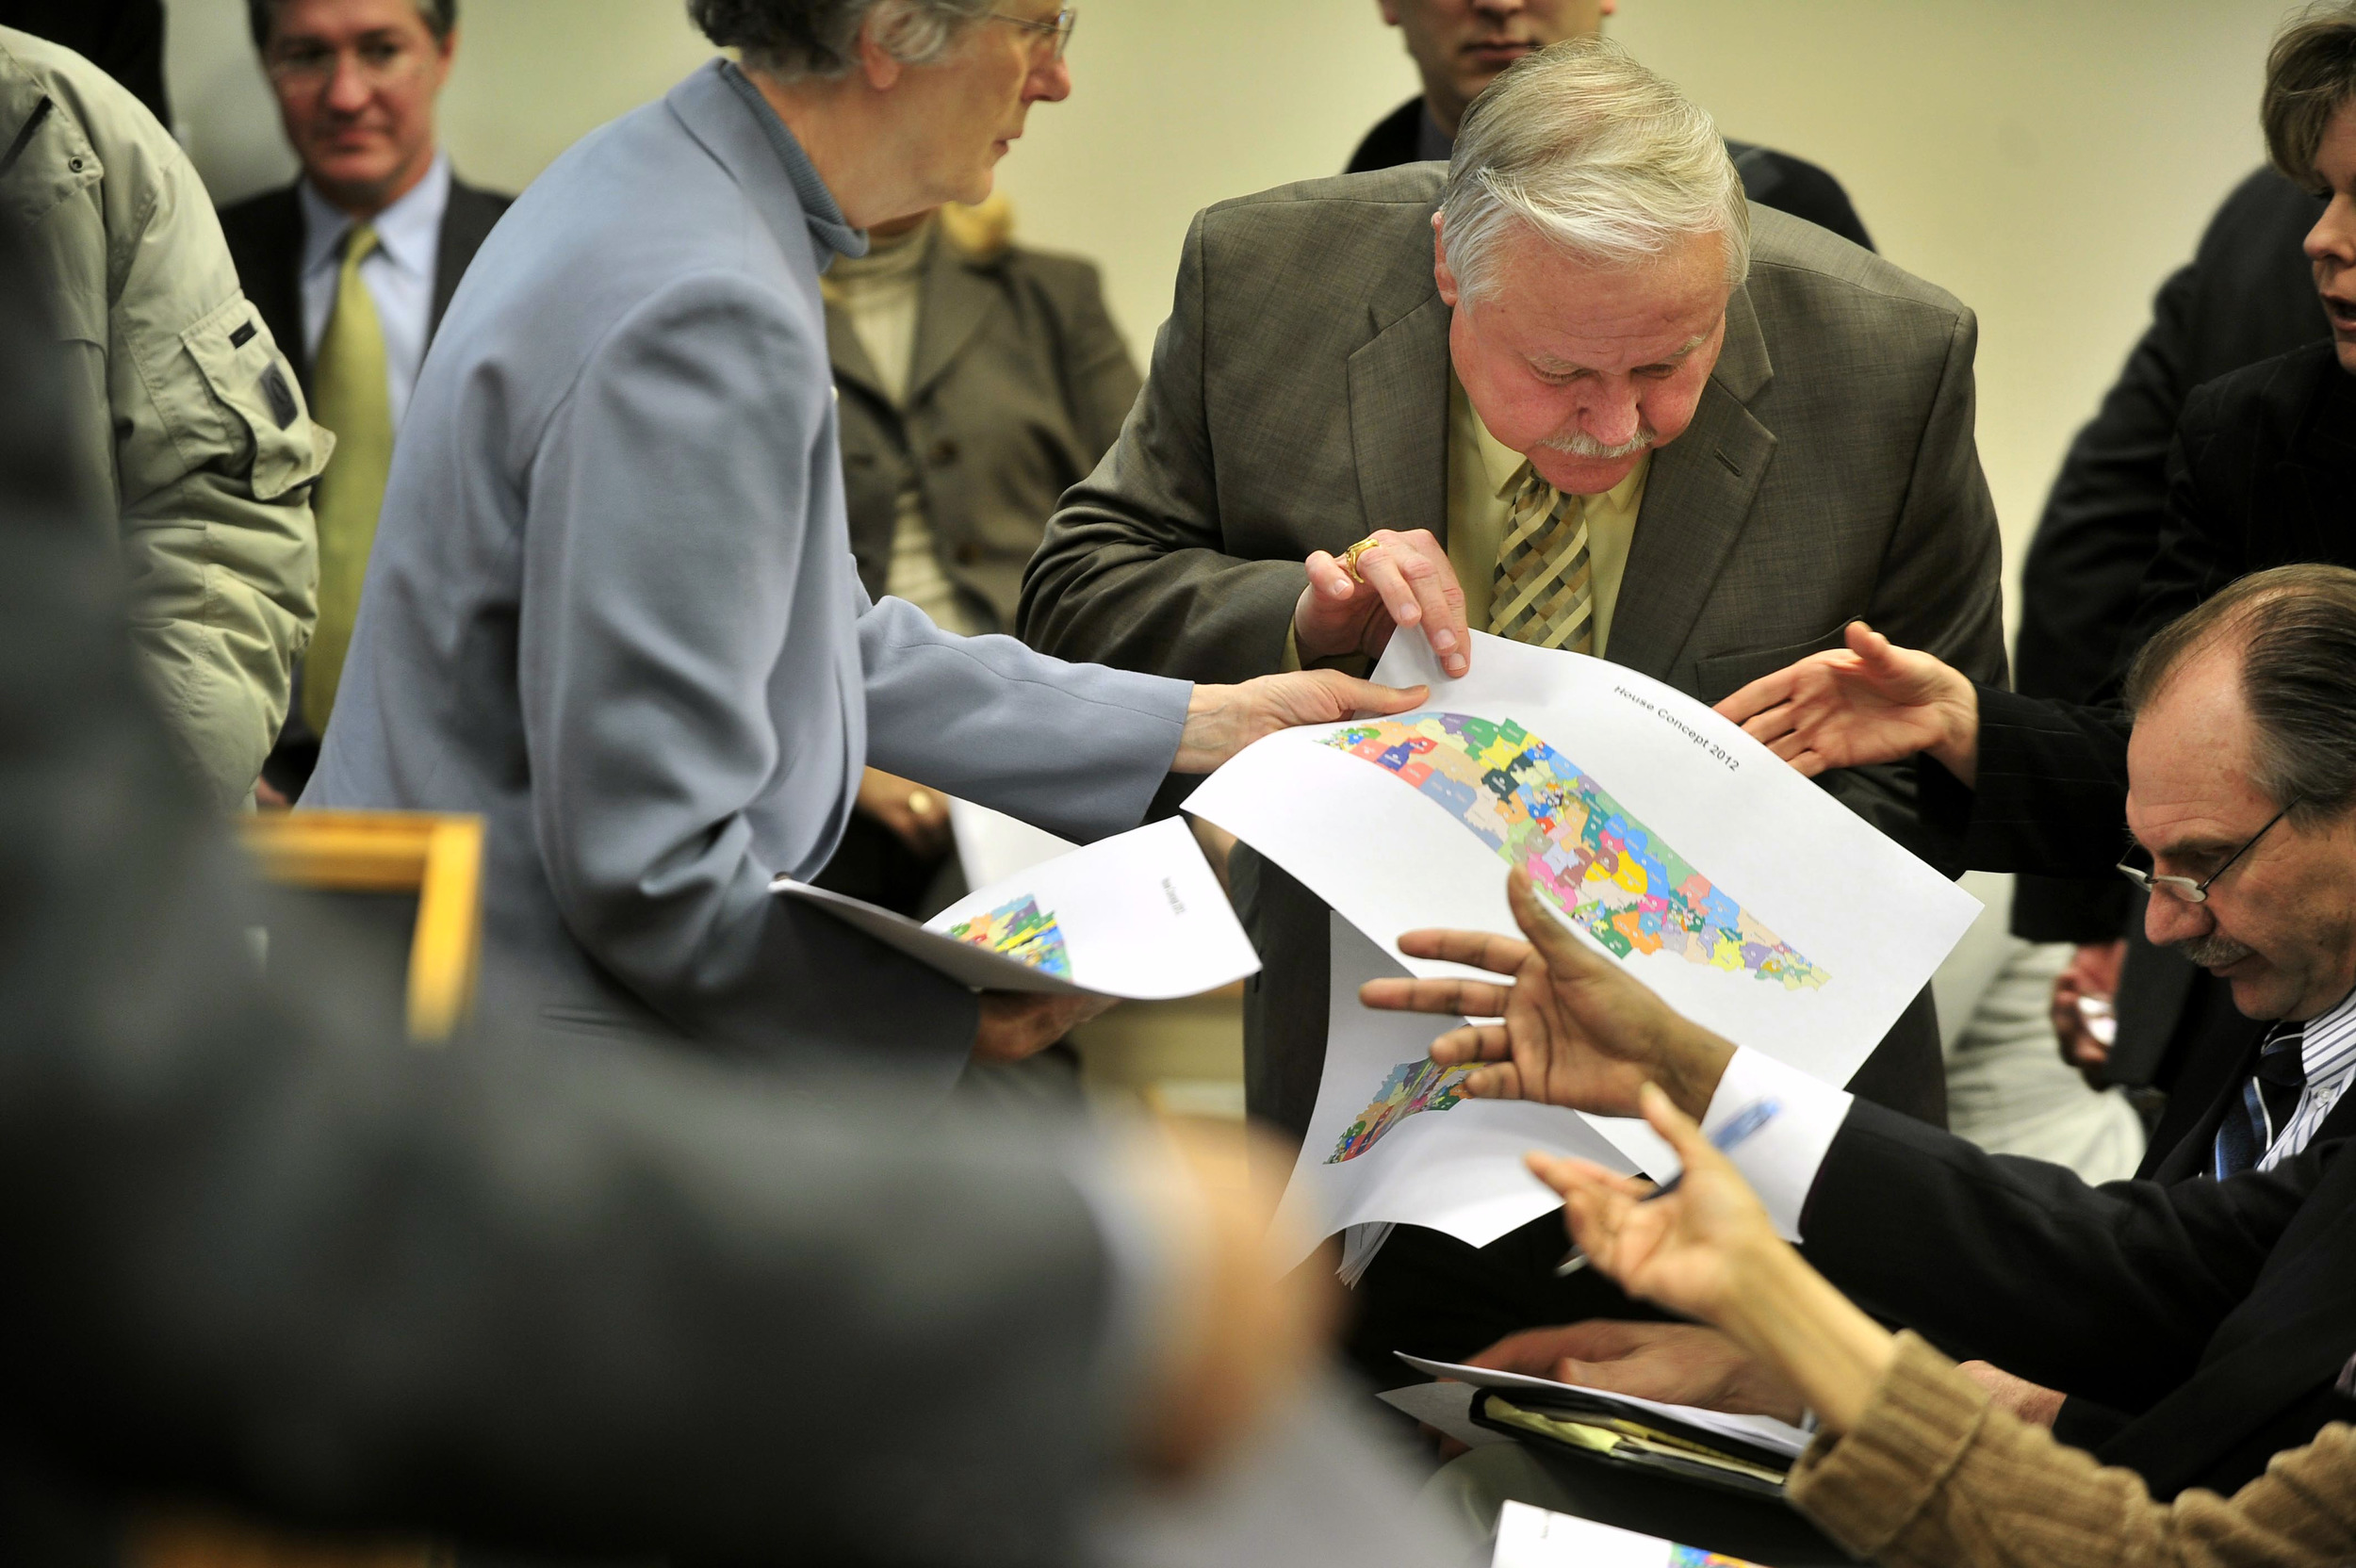  Attorney Sally Swaney hands out redistricting maps to a crowd of lawmakers including Rep. Gary Moore D-Joelton, and Rep. Mark Pody R-Lebanon, right. The map was a controversial plan proposed by Republican lawmakers January 4, 2012 Nashville, Tenn. 